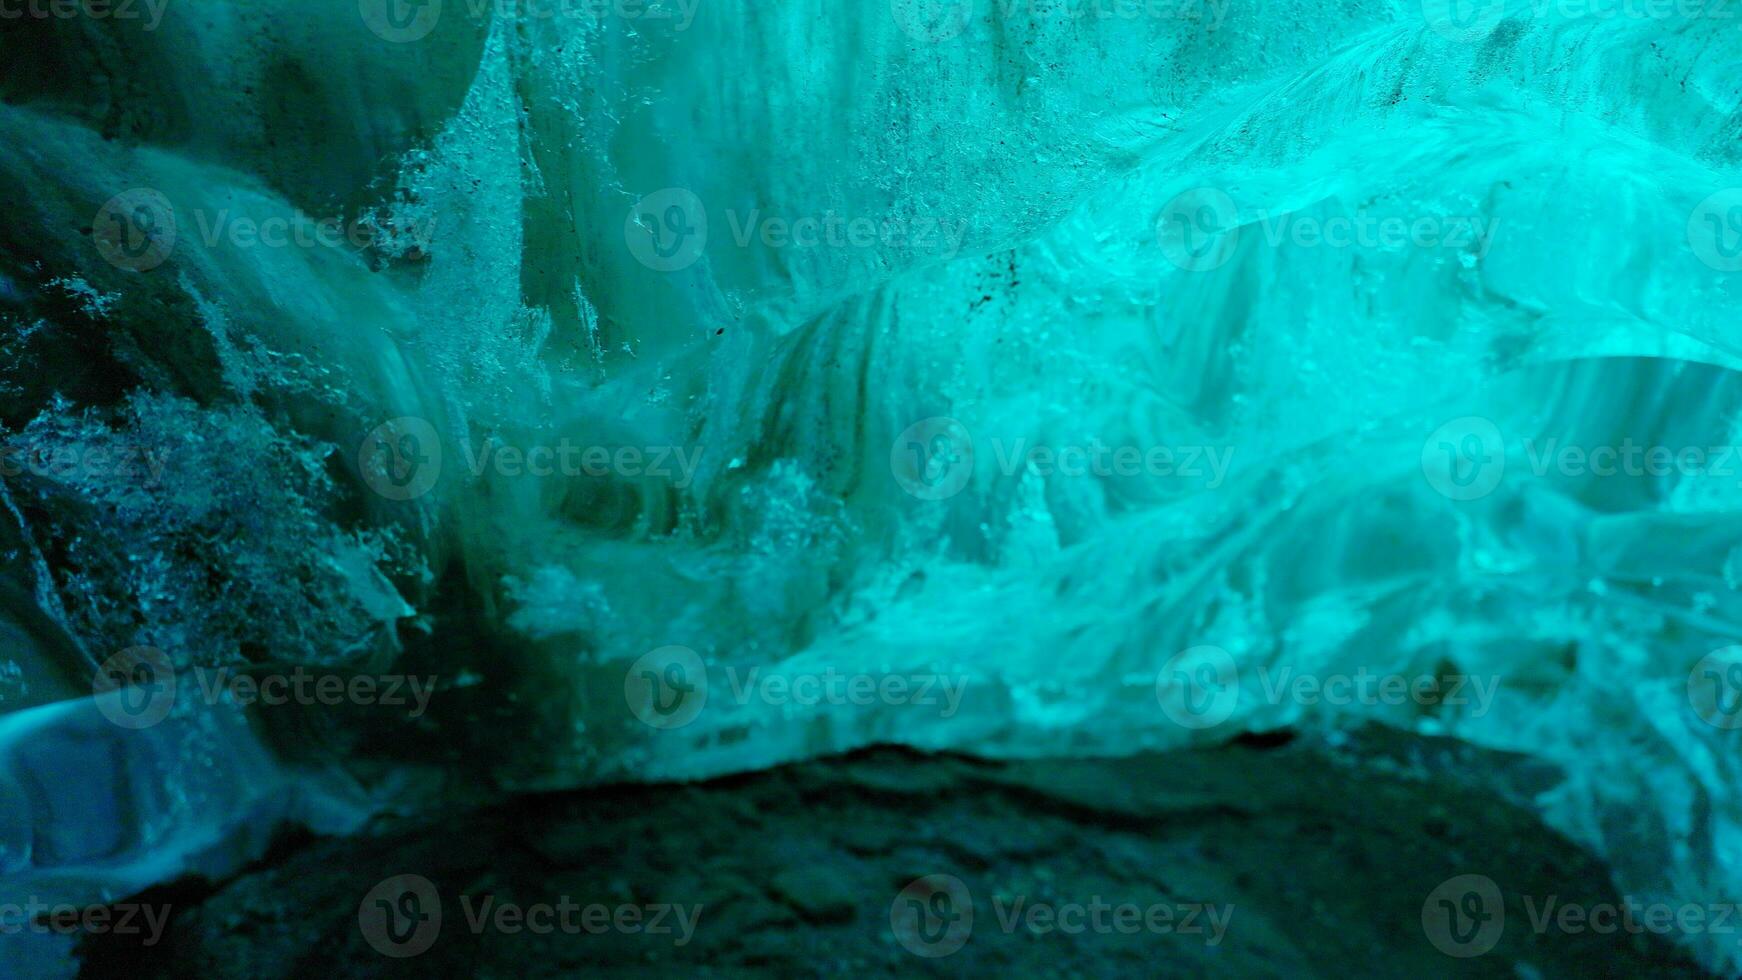 Water dripping from ice rocks in north, global warming concept. Icy blocks melting inside vatnajokull glacier caves, icelandic scenery being destroyed after climate change. Handheld shot. photo